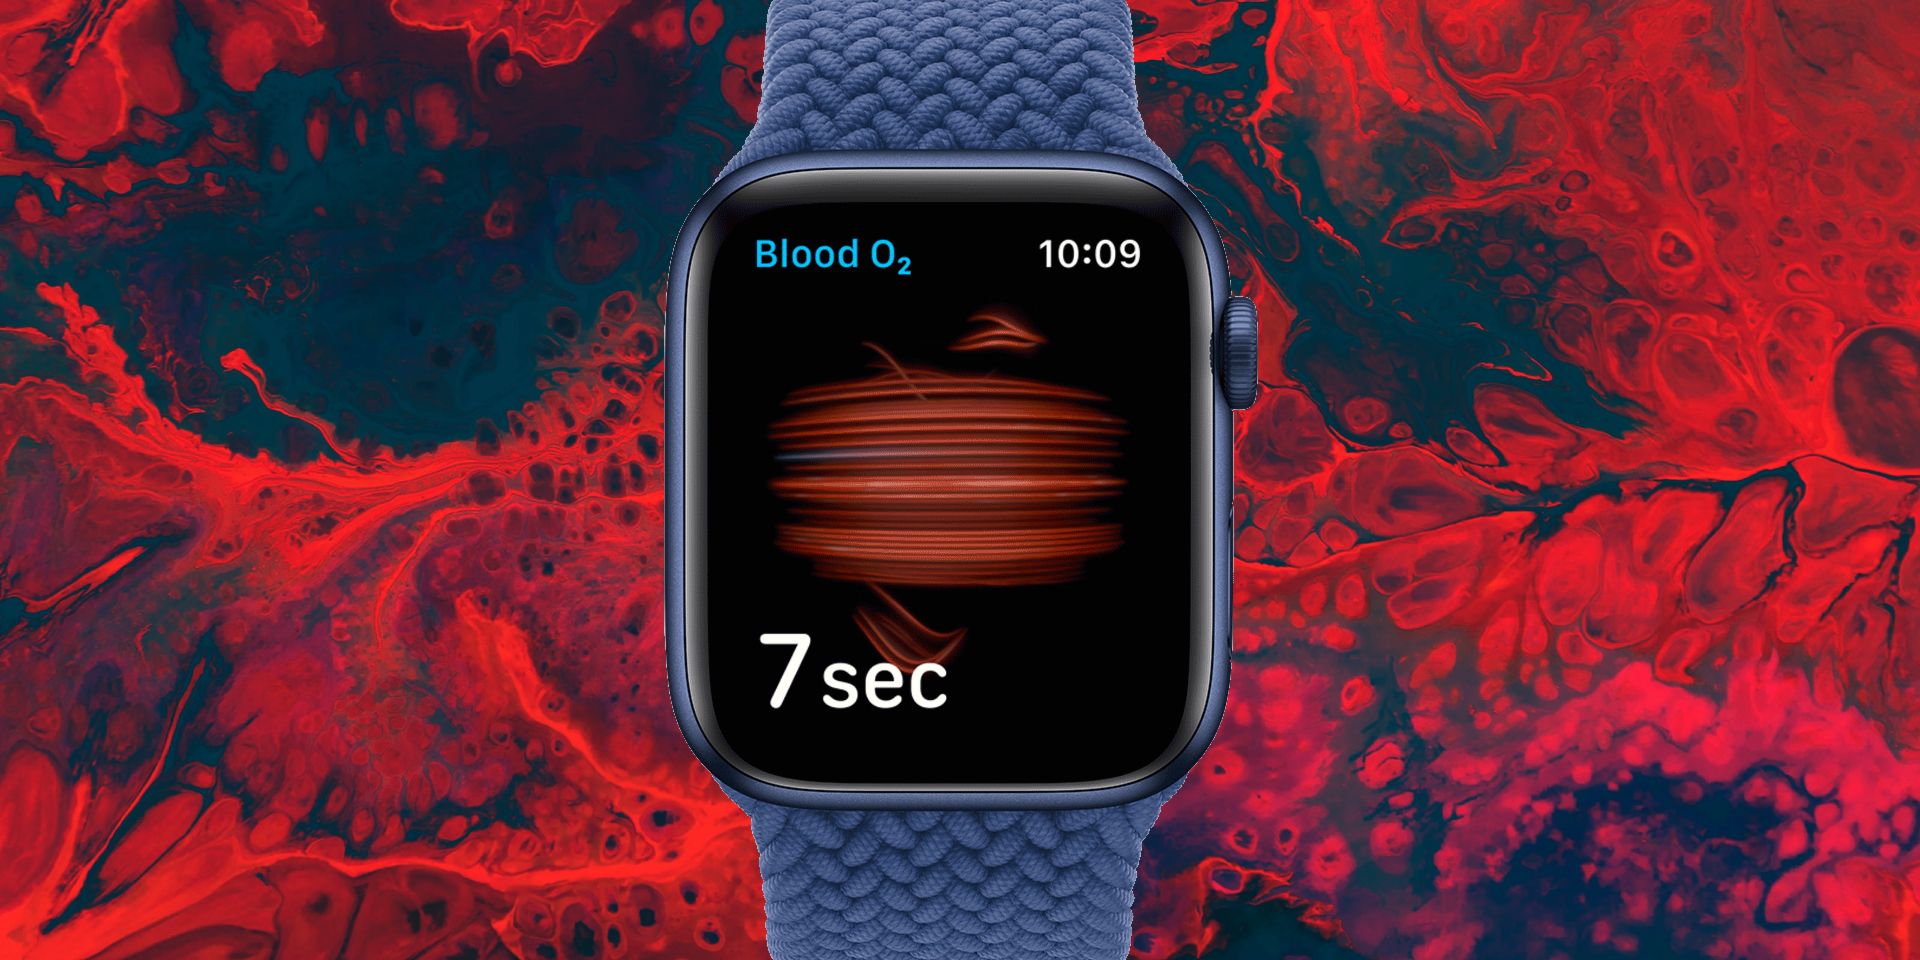 All Of The Apple Watch Health Monitoring & Management Features